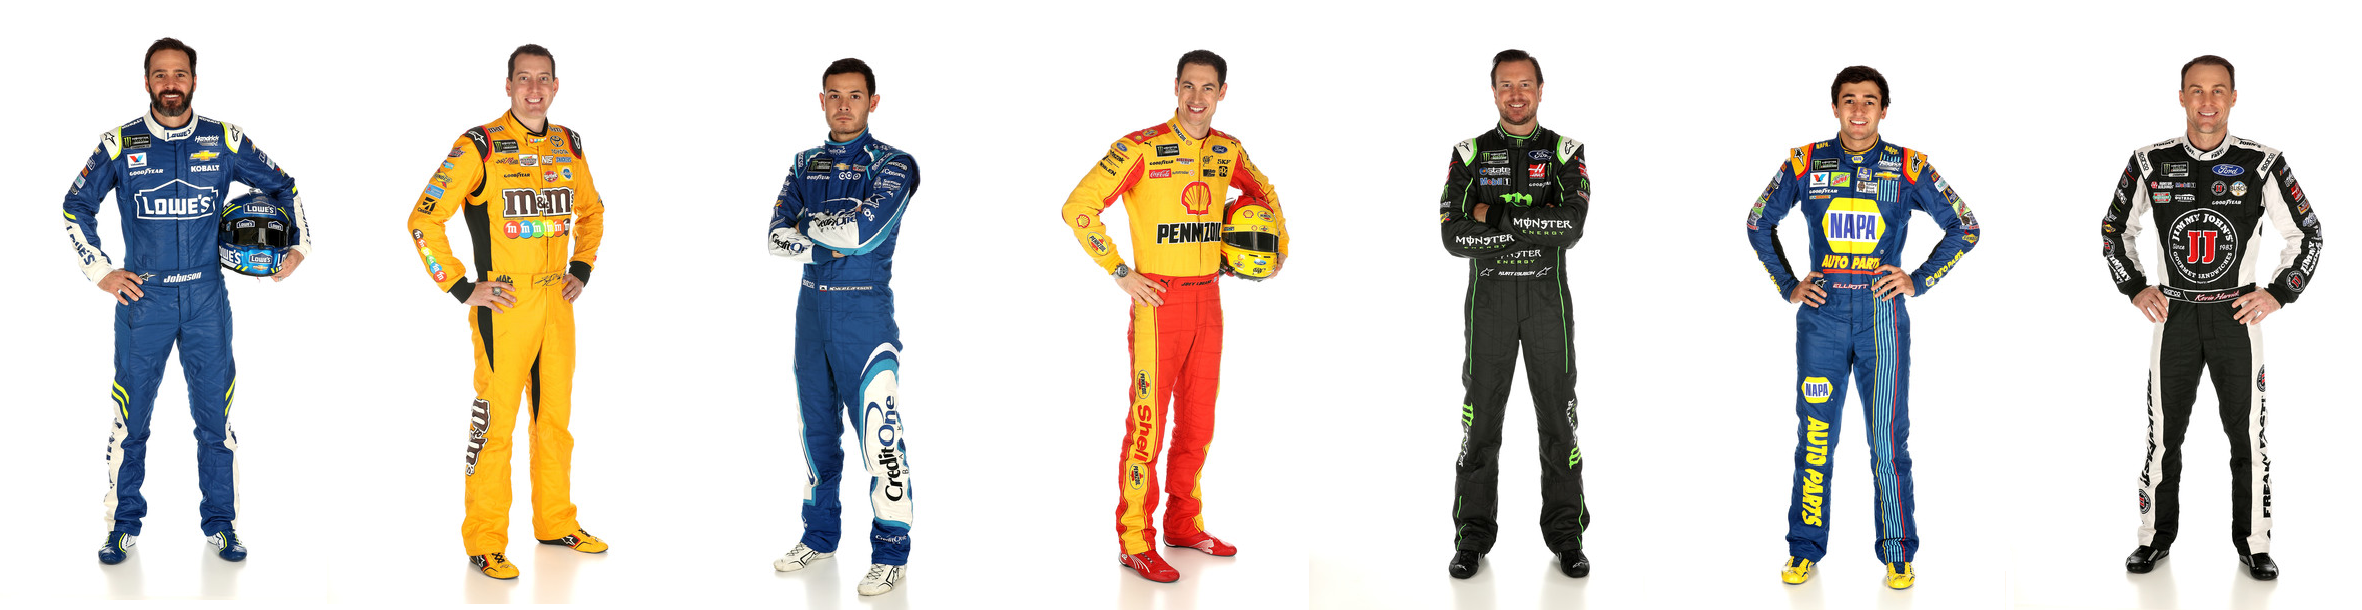 Which of these seven smiles at Dover's Victory Lane?